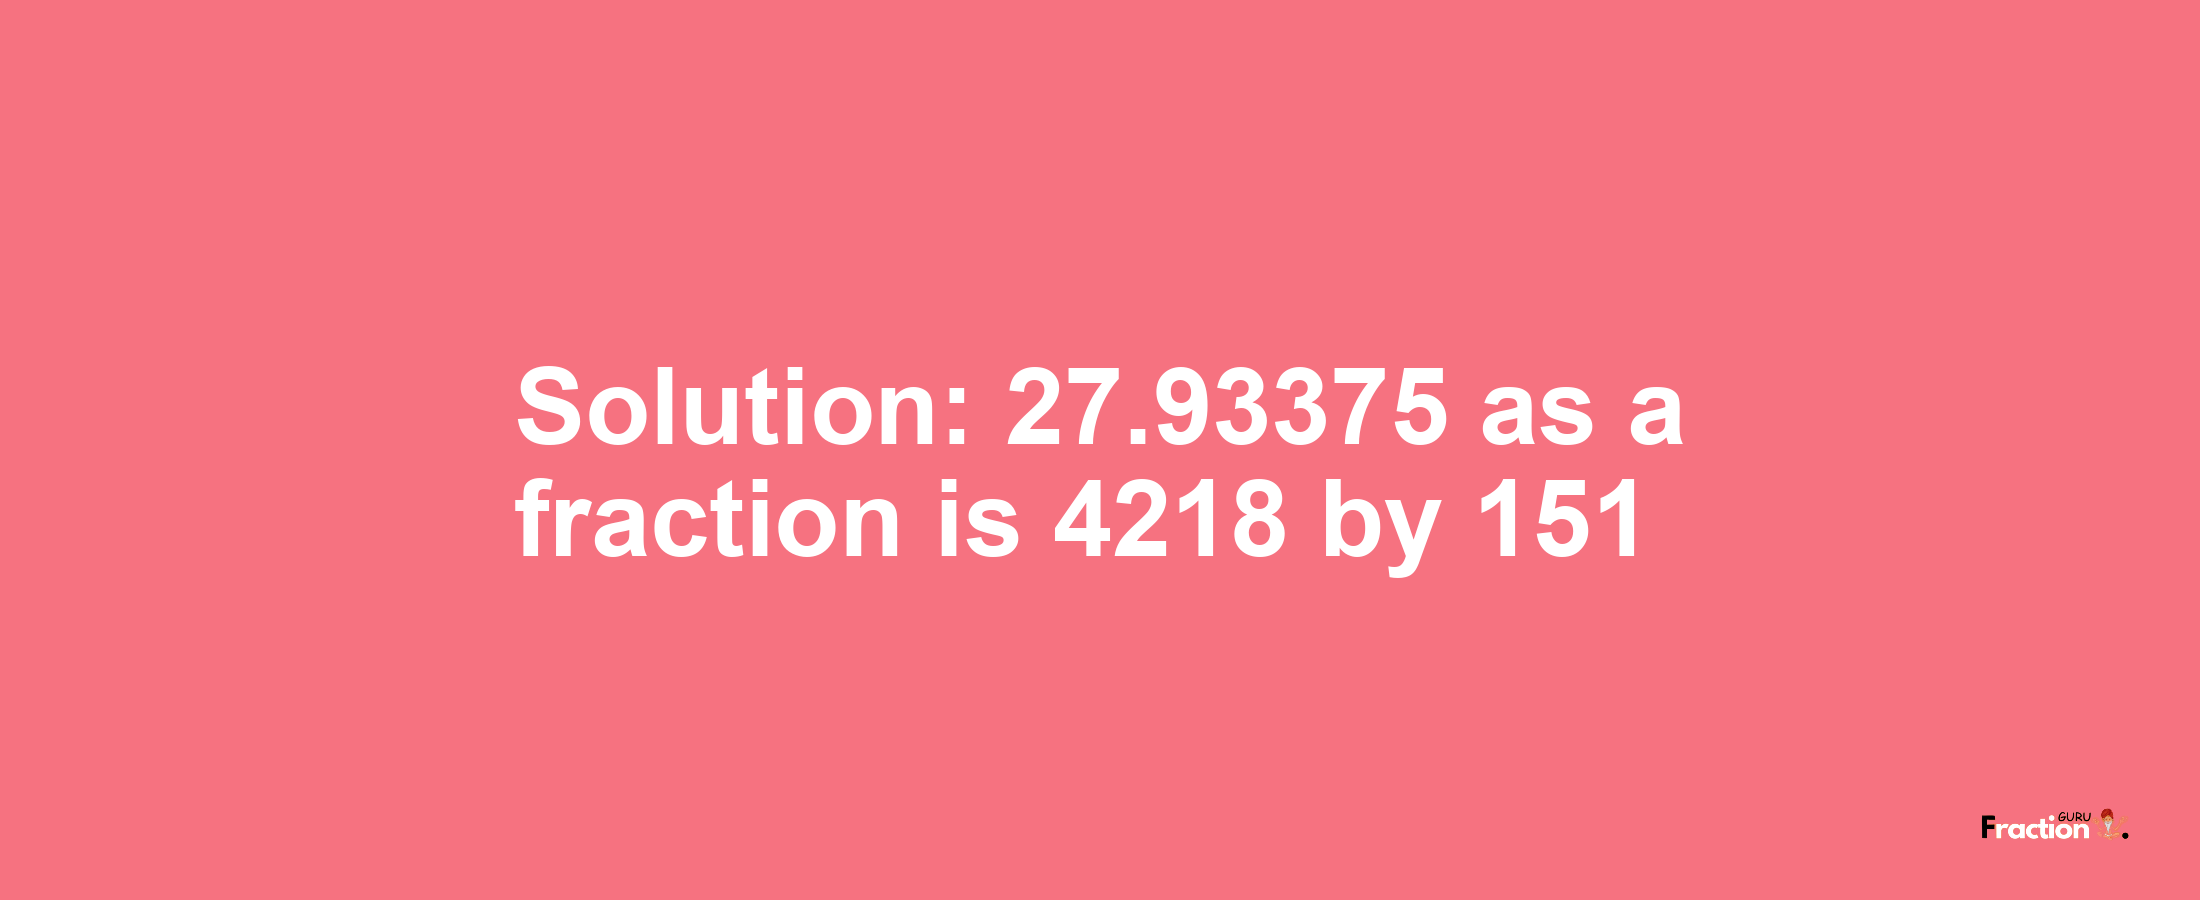 Solution:27.93375 as a fraction is 4218/151